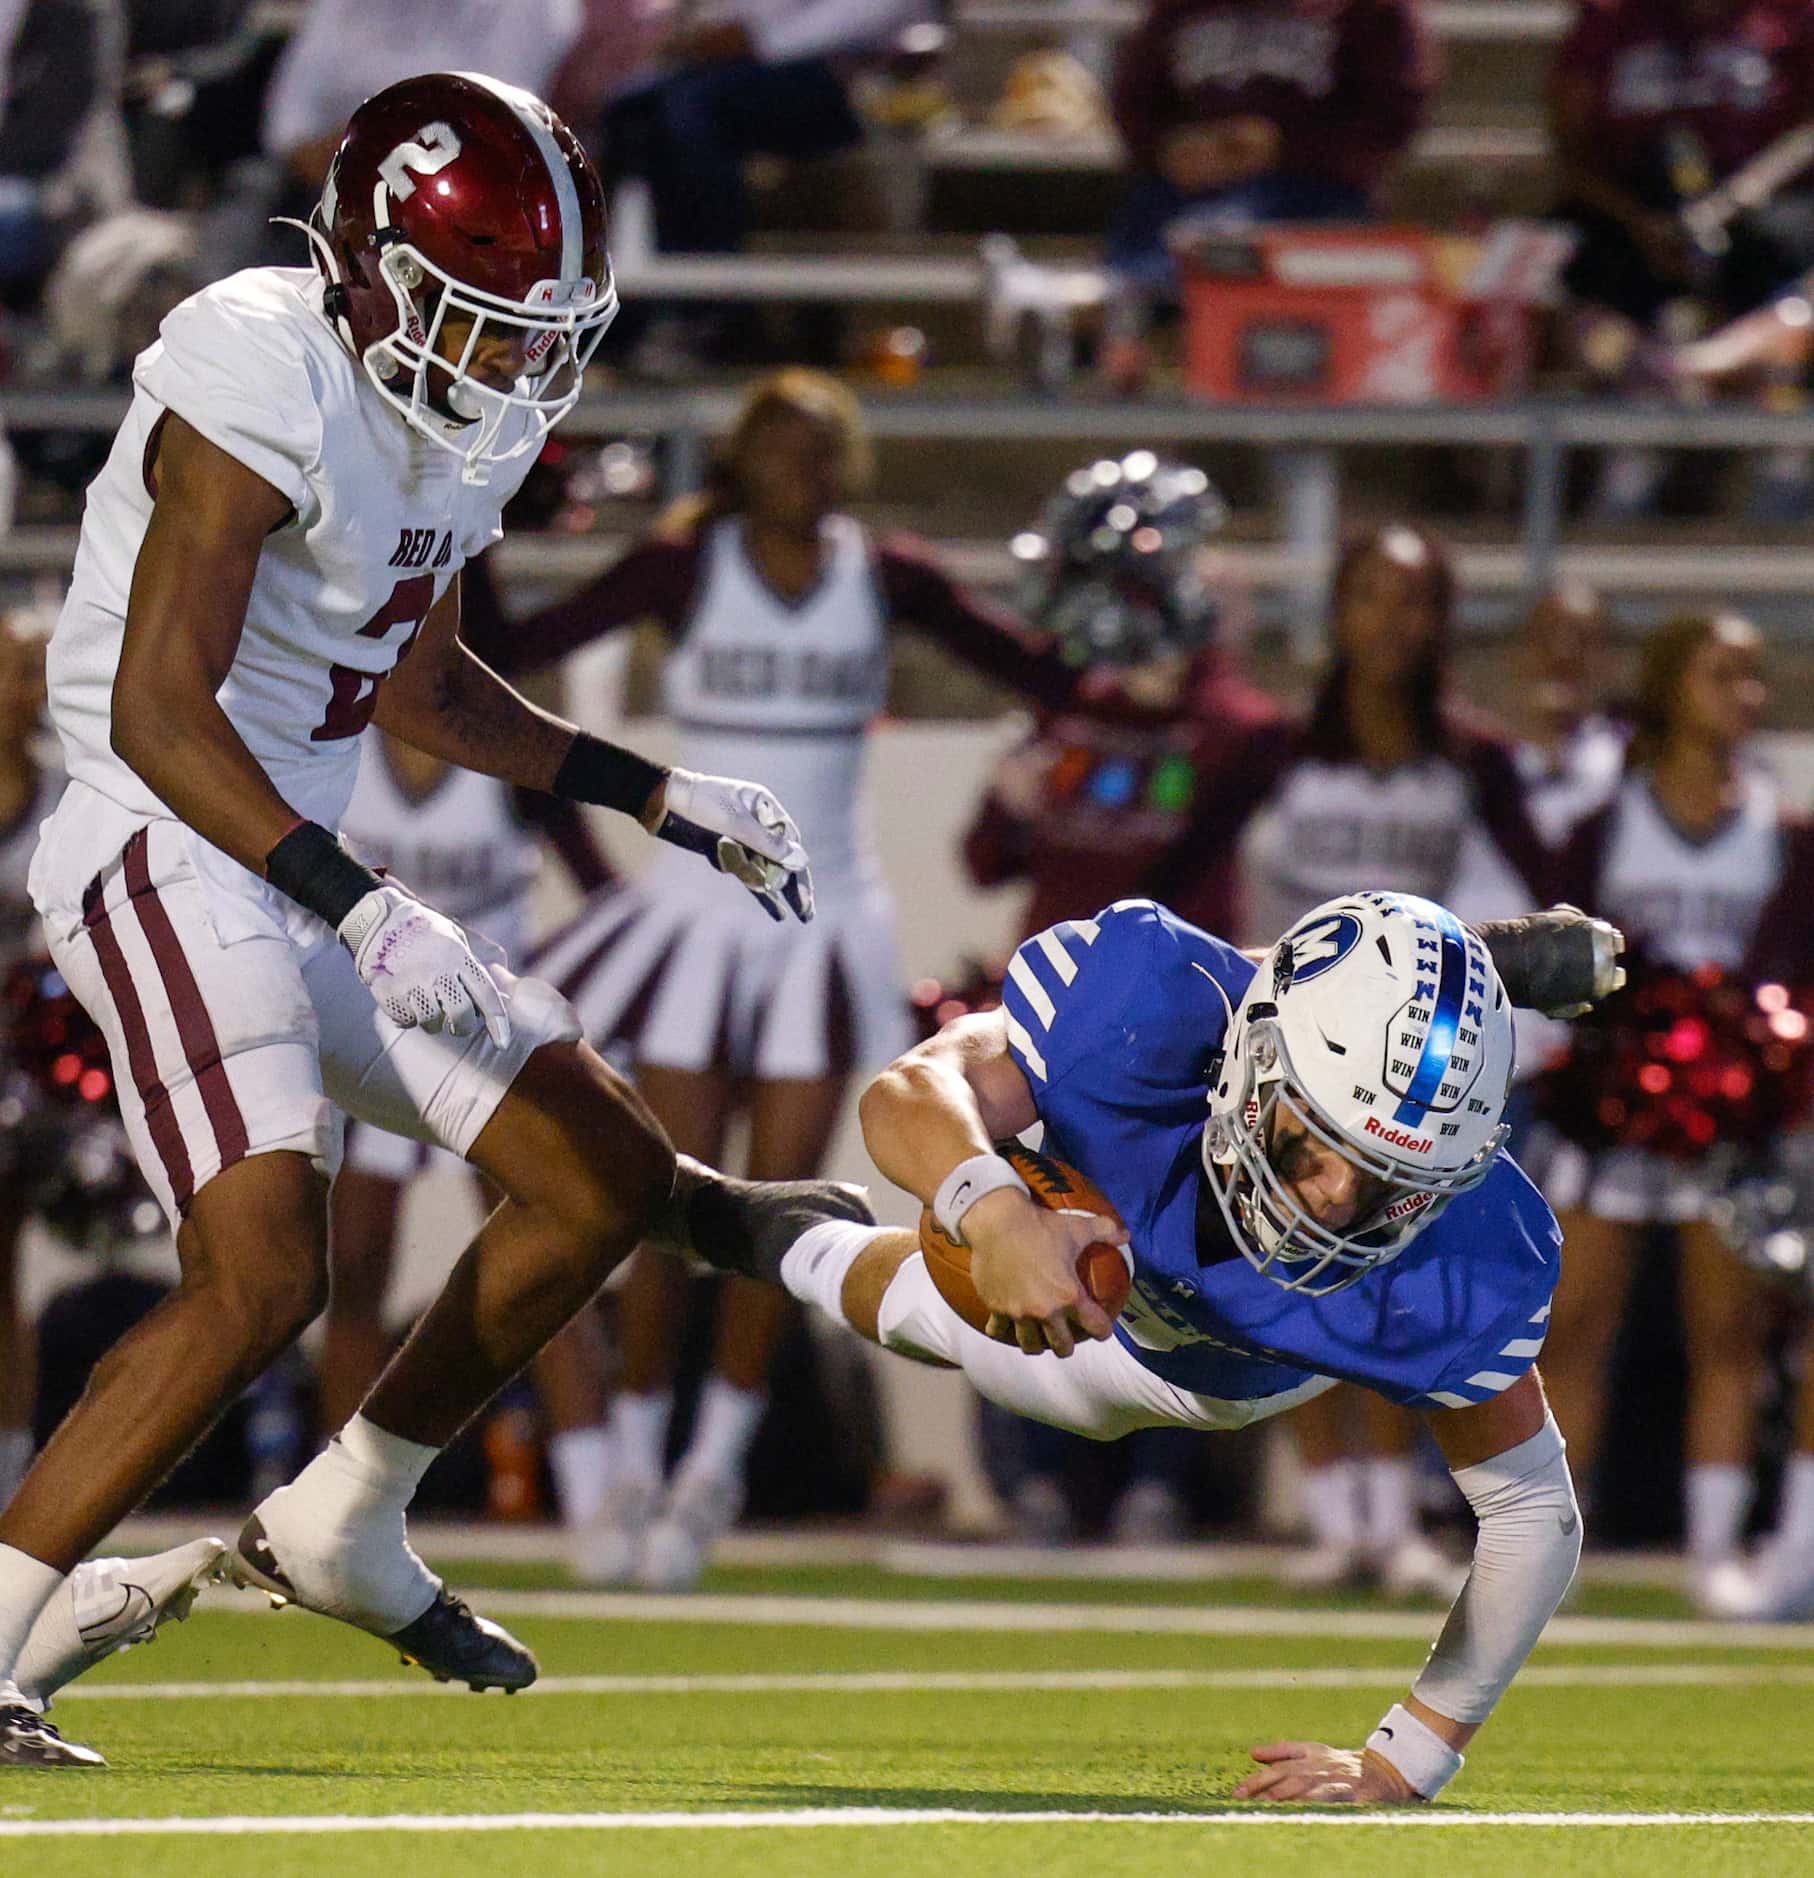 Midlothian quarterback Chad Ragle (9) dives for a touchdown ahead of Red Oak defensive back...